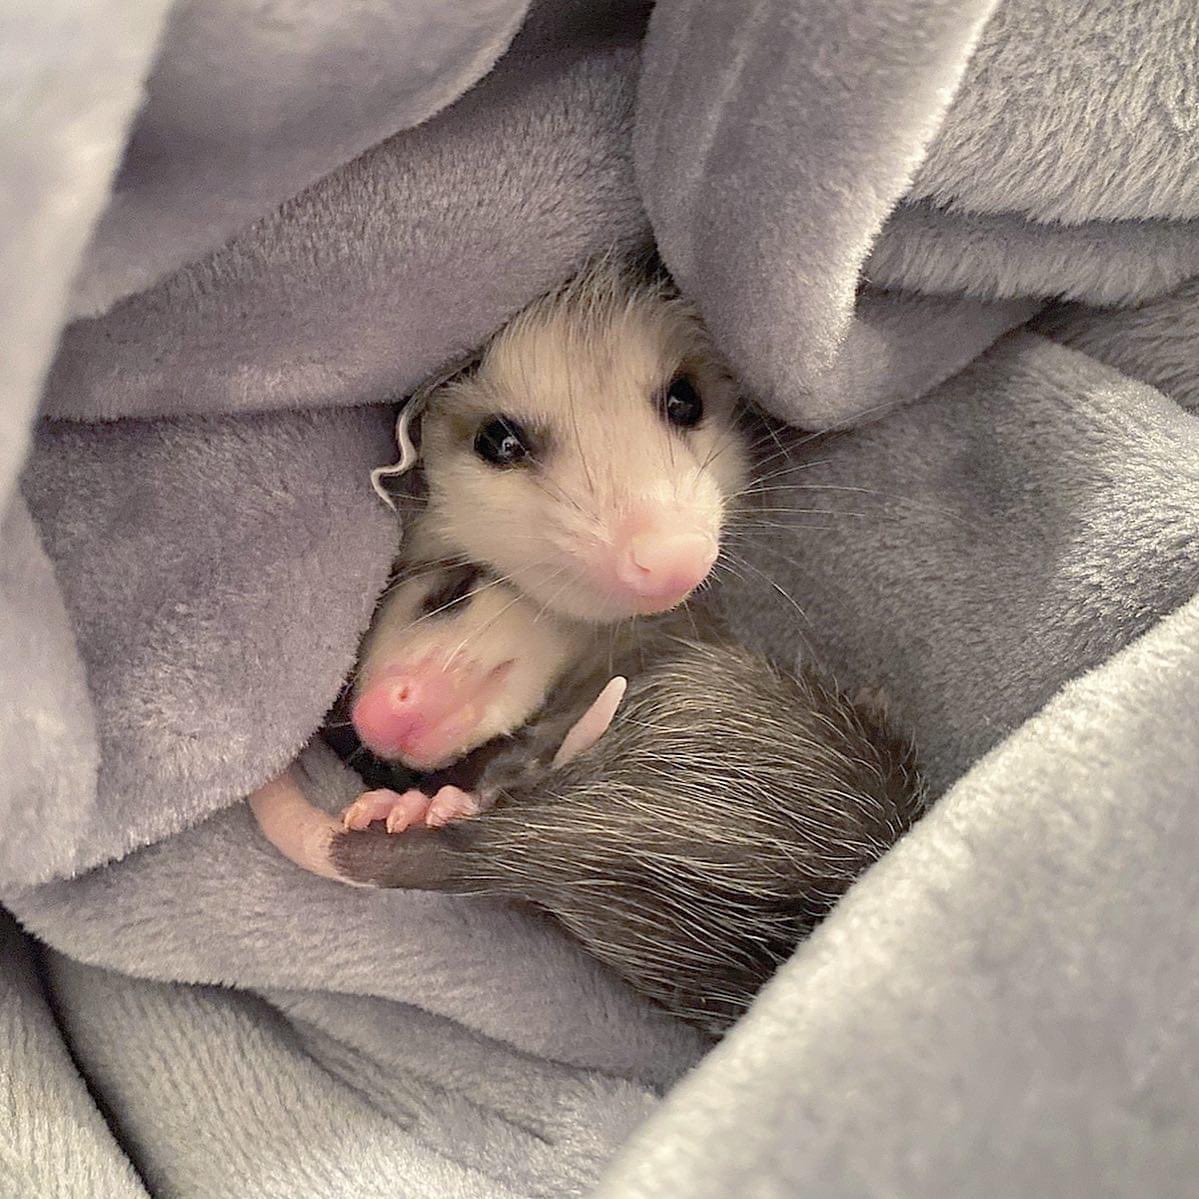 Pocket Possum Auf Twitter Babby Possums The Parent Poss Says Get Some Sleep Tonight If Anxious Think Soft Cozy Thoughts If Lonely Perhaps Snuggle A Soft Friend Or A Blanket Or Pillow